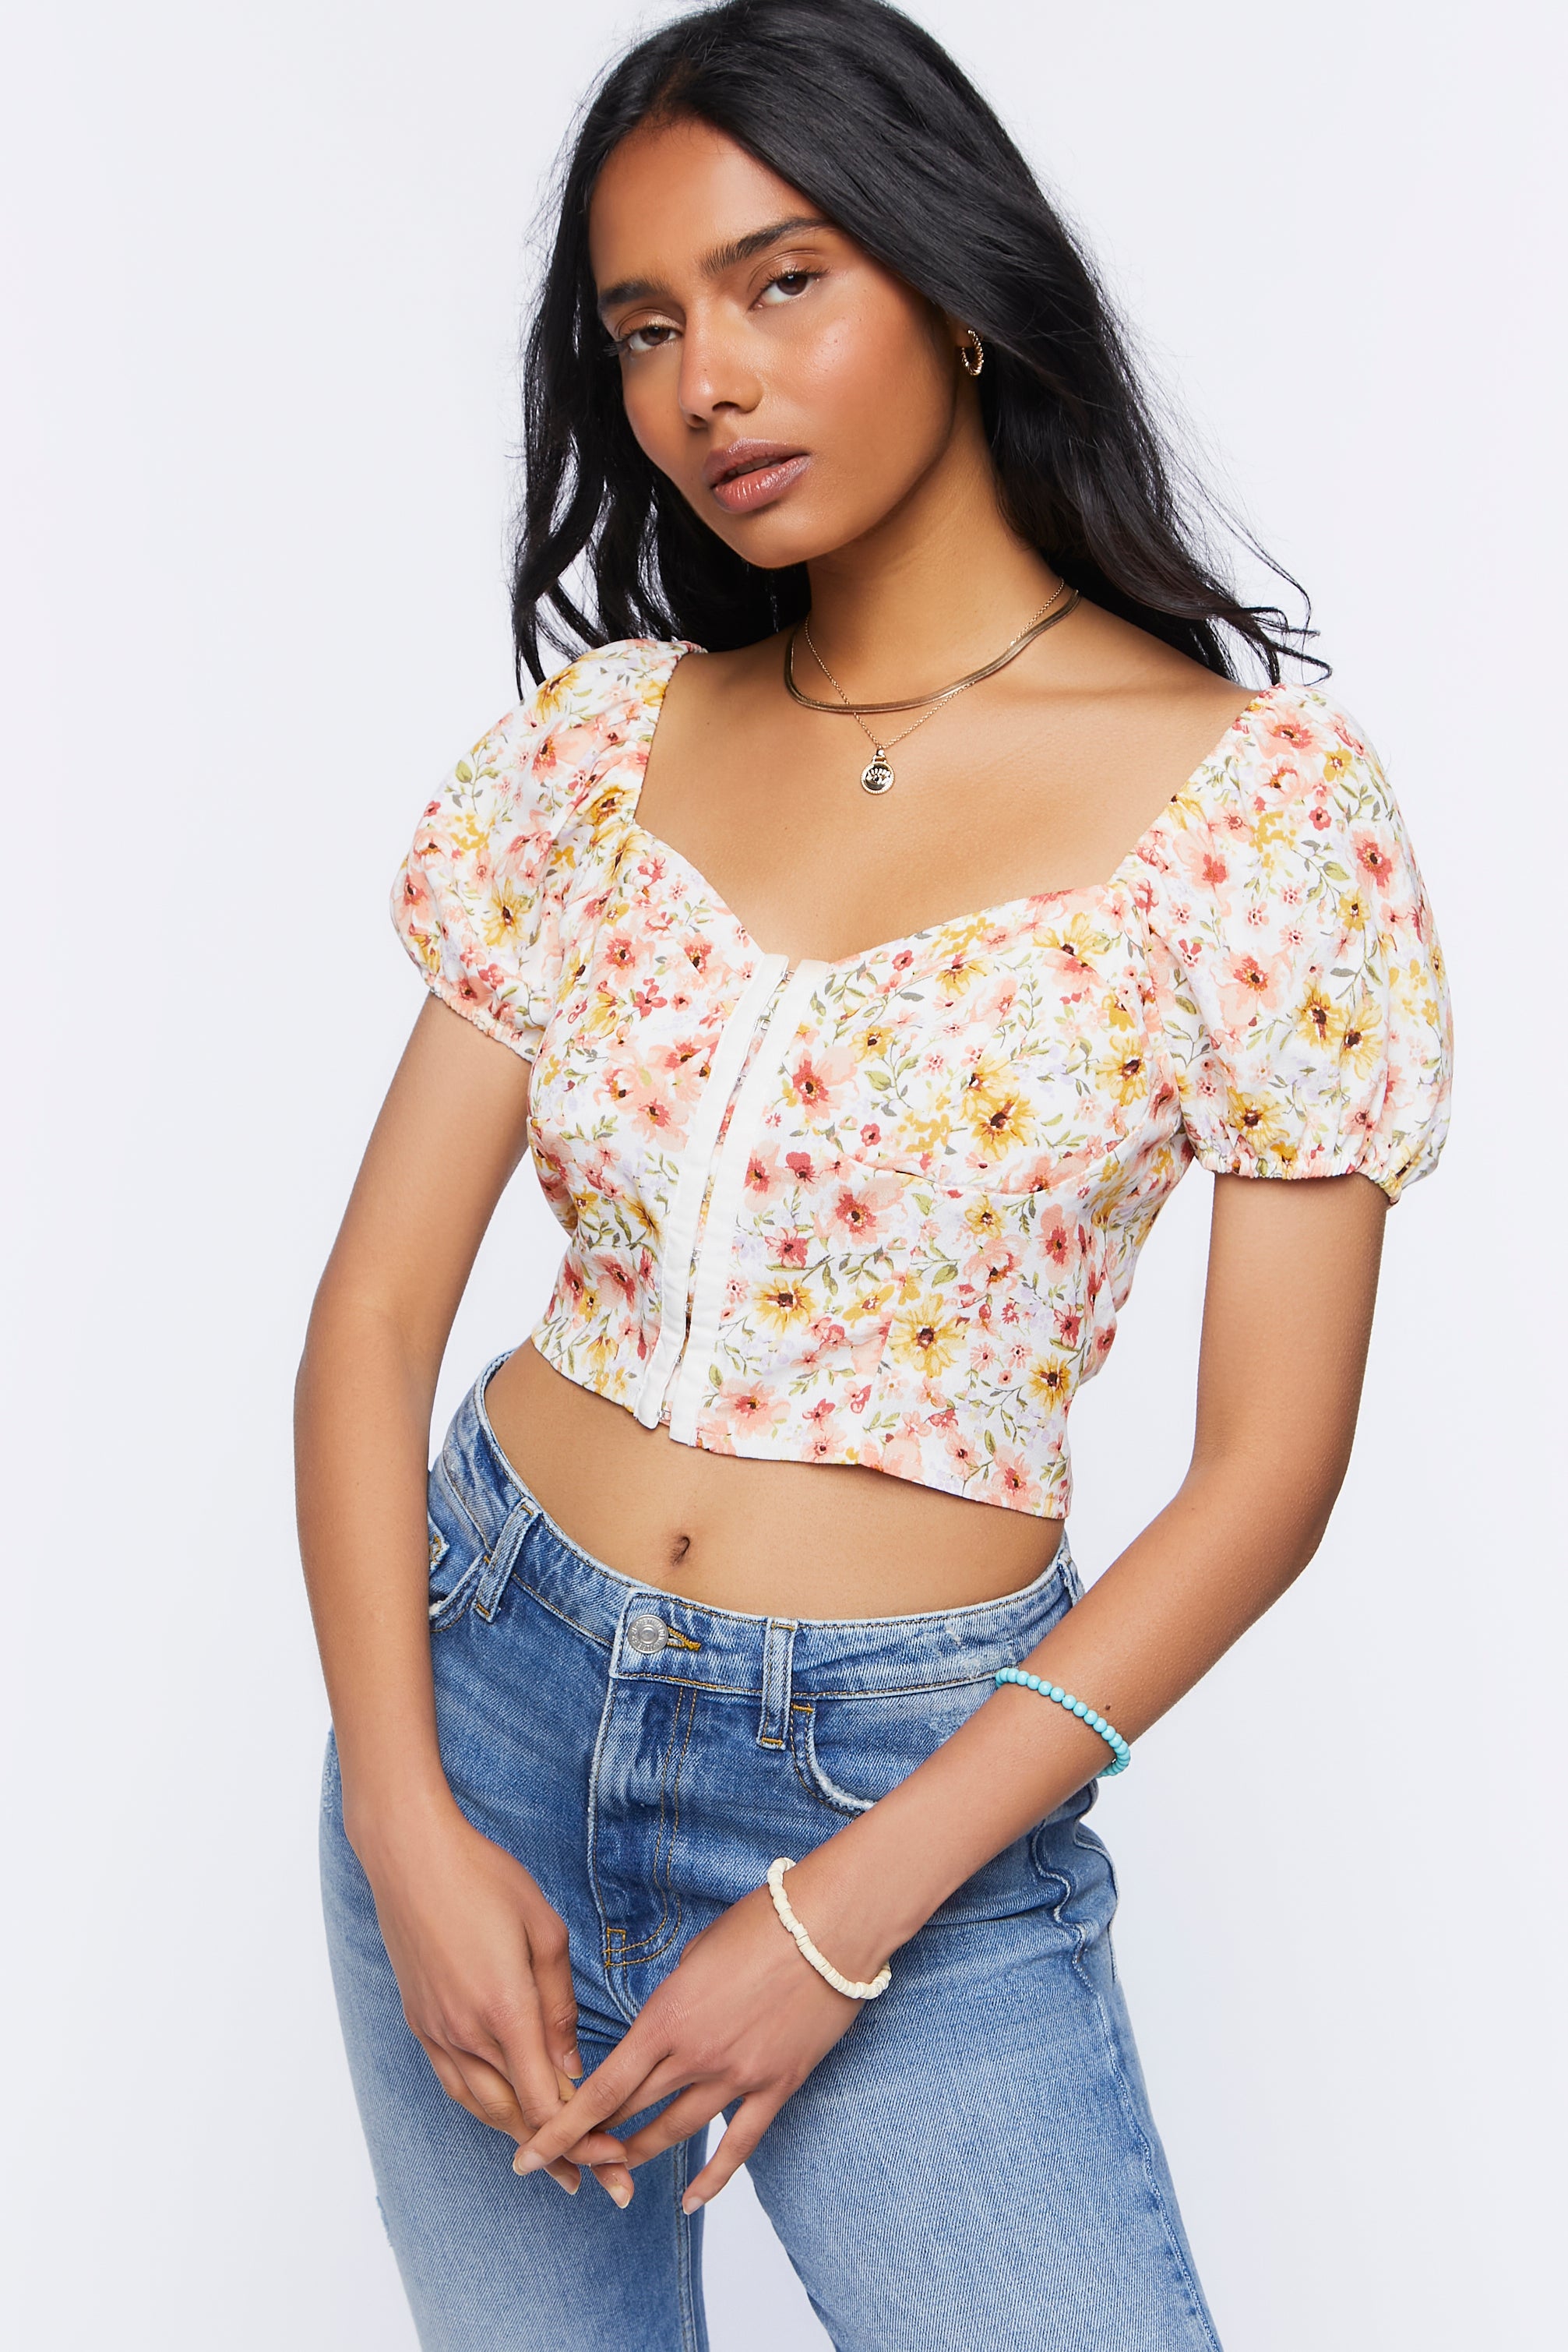 Ivorymulti Sweetheart Floral Print Top 